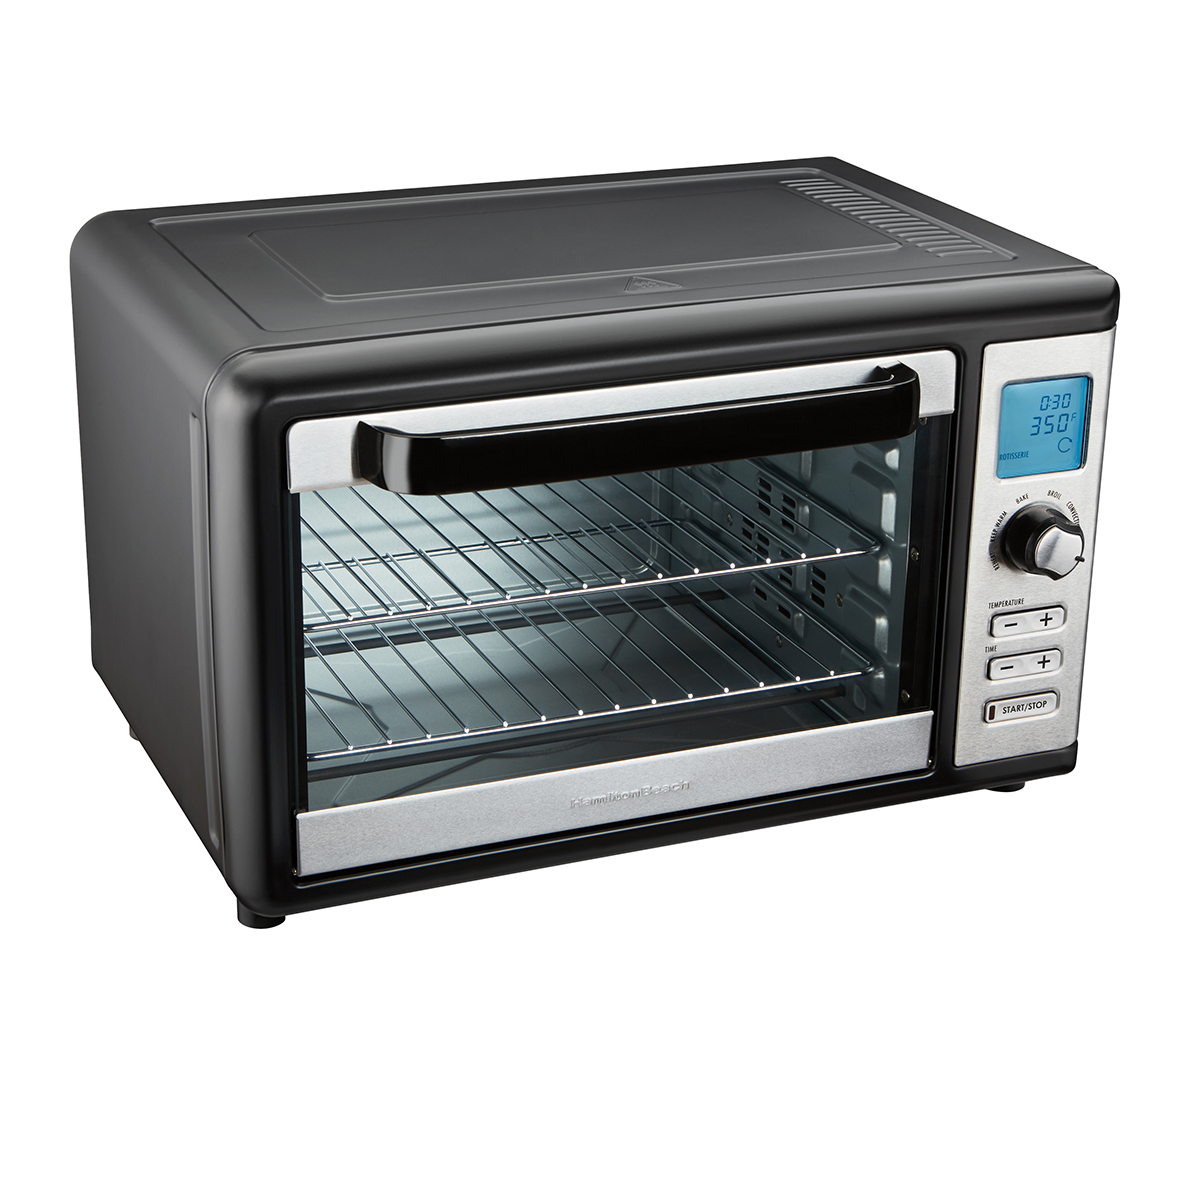 Digital Countertop Oven with Convection and Rotisserie (31154)